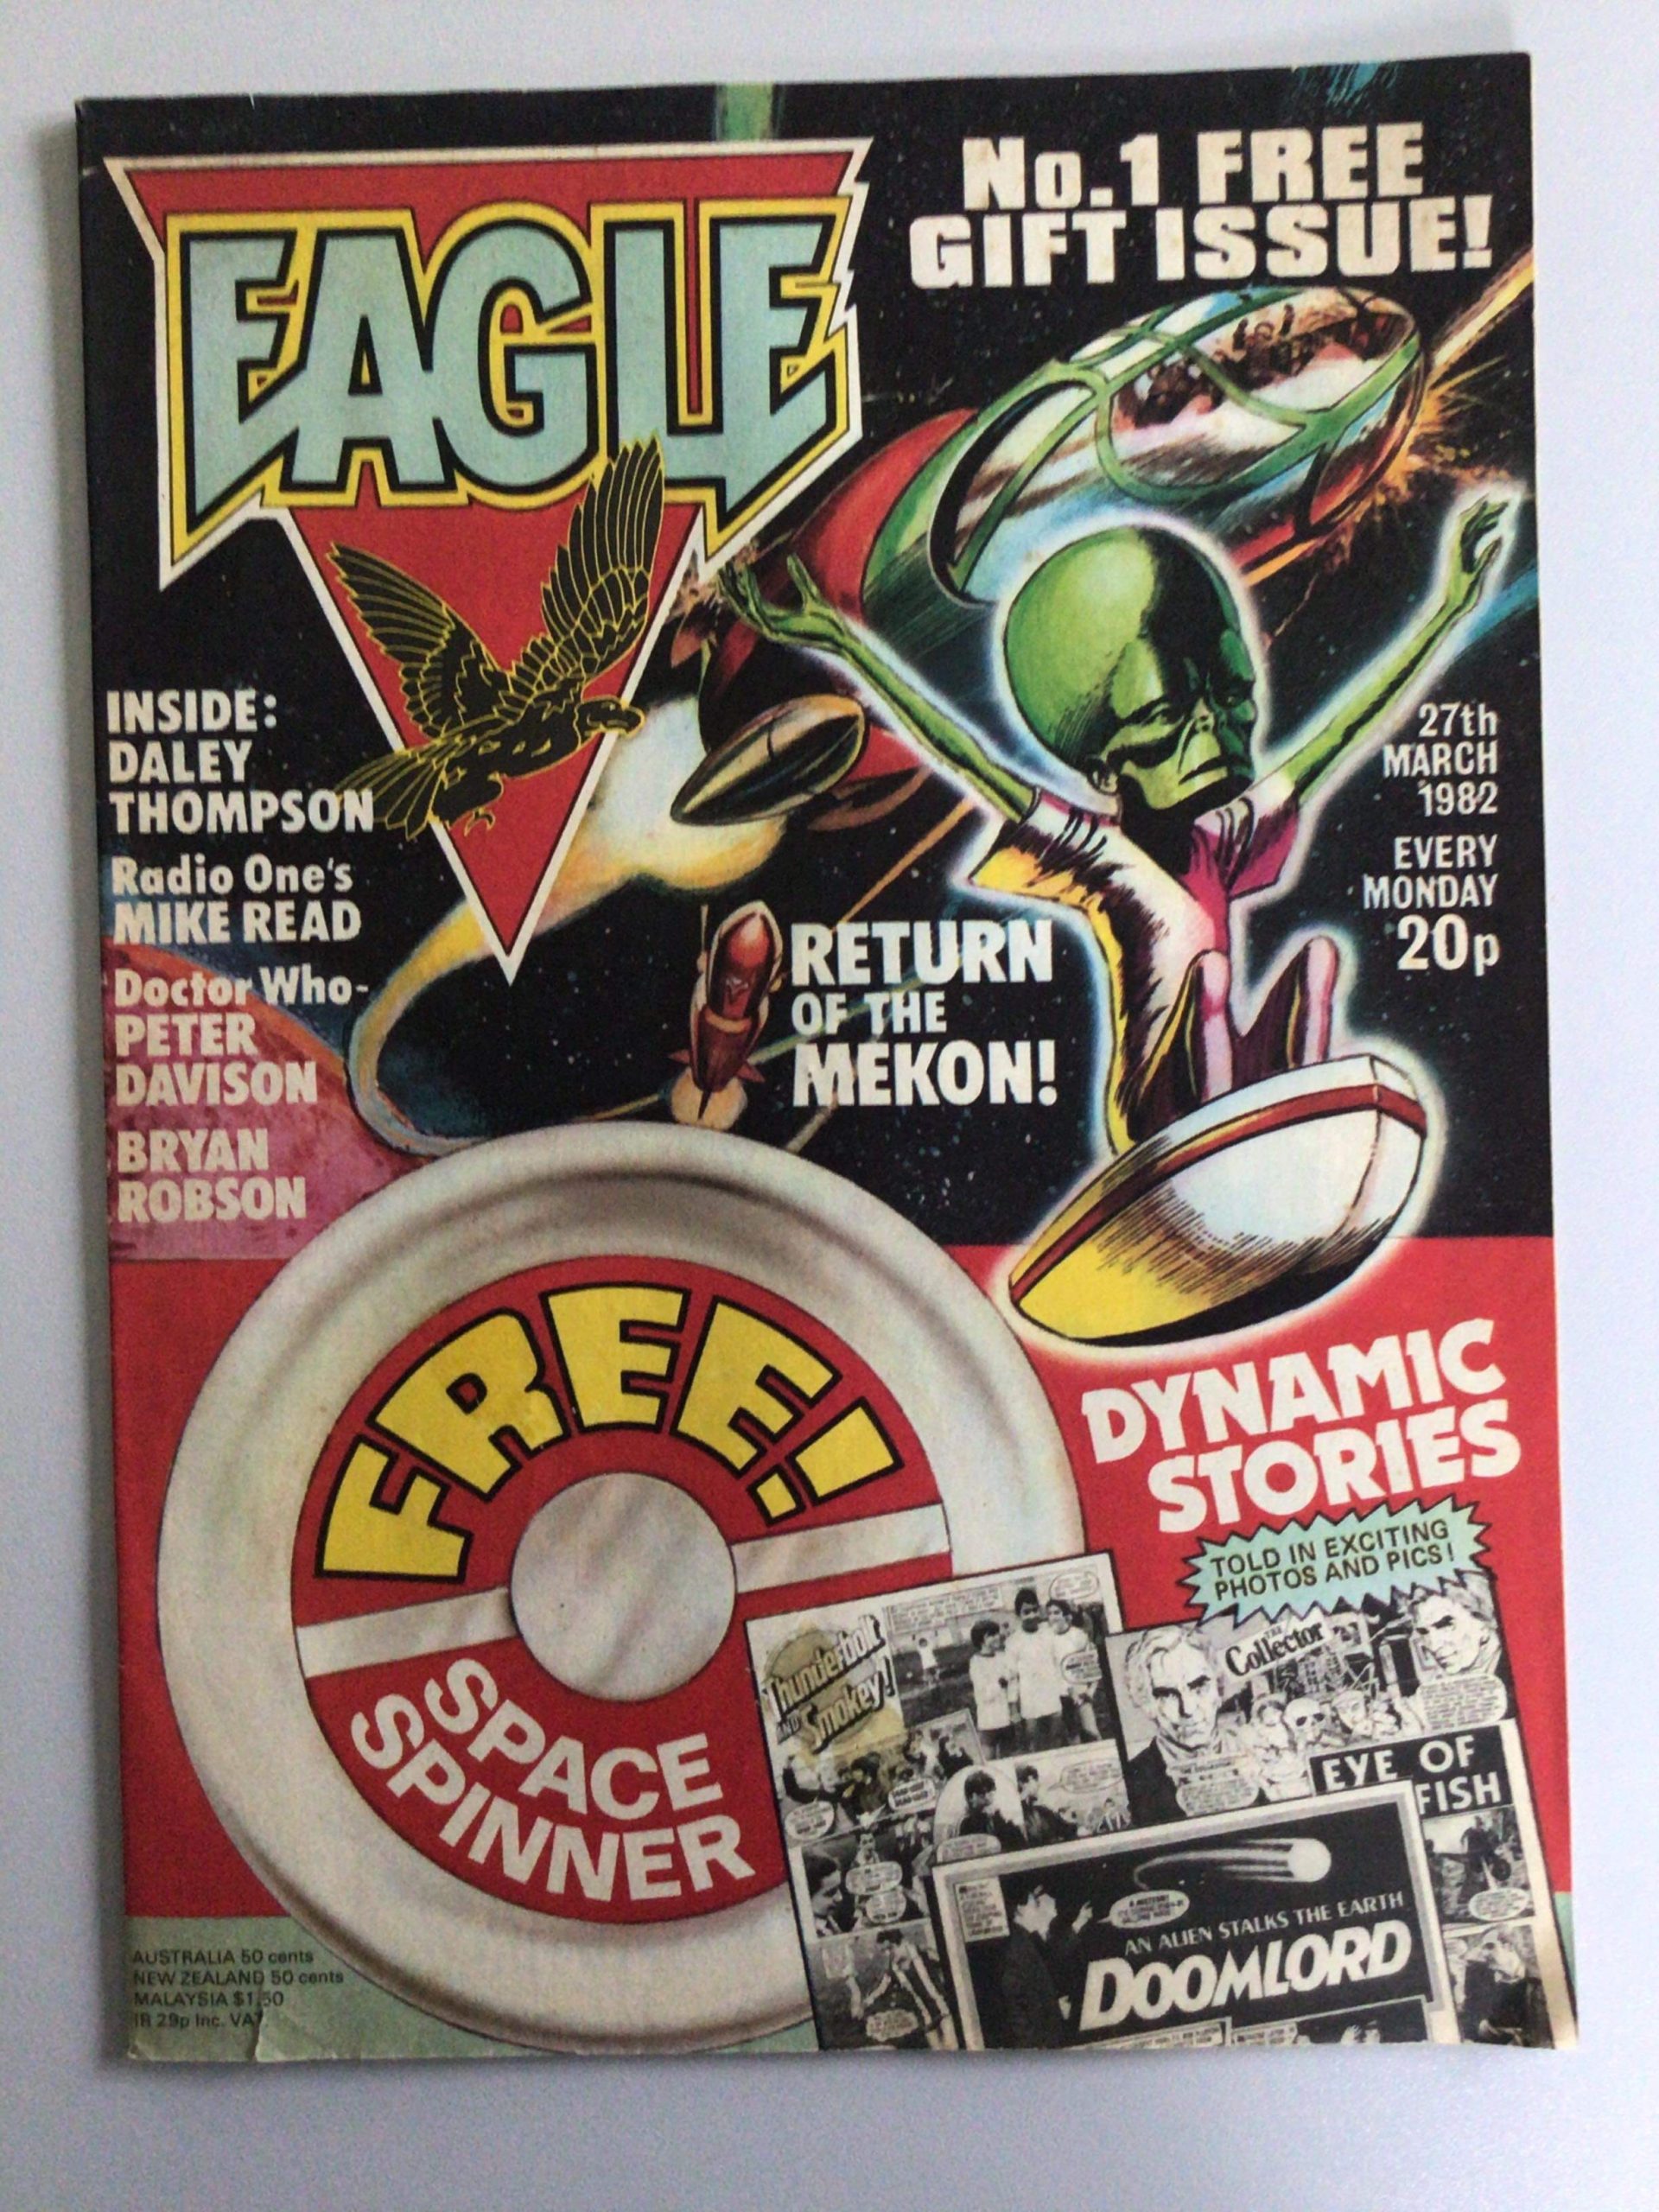 Eagle Comic No. 1 - cover dated 27th March 1982